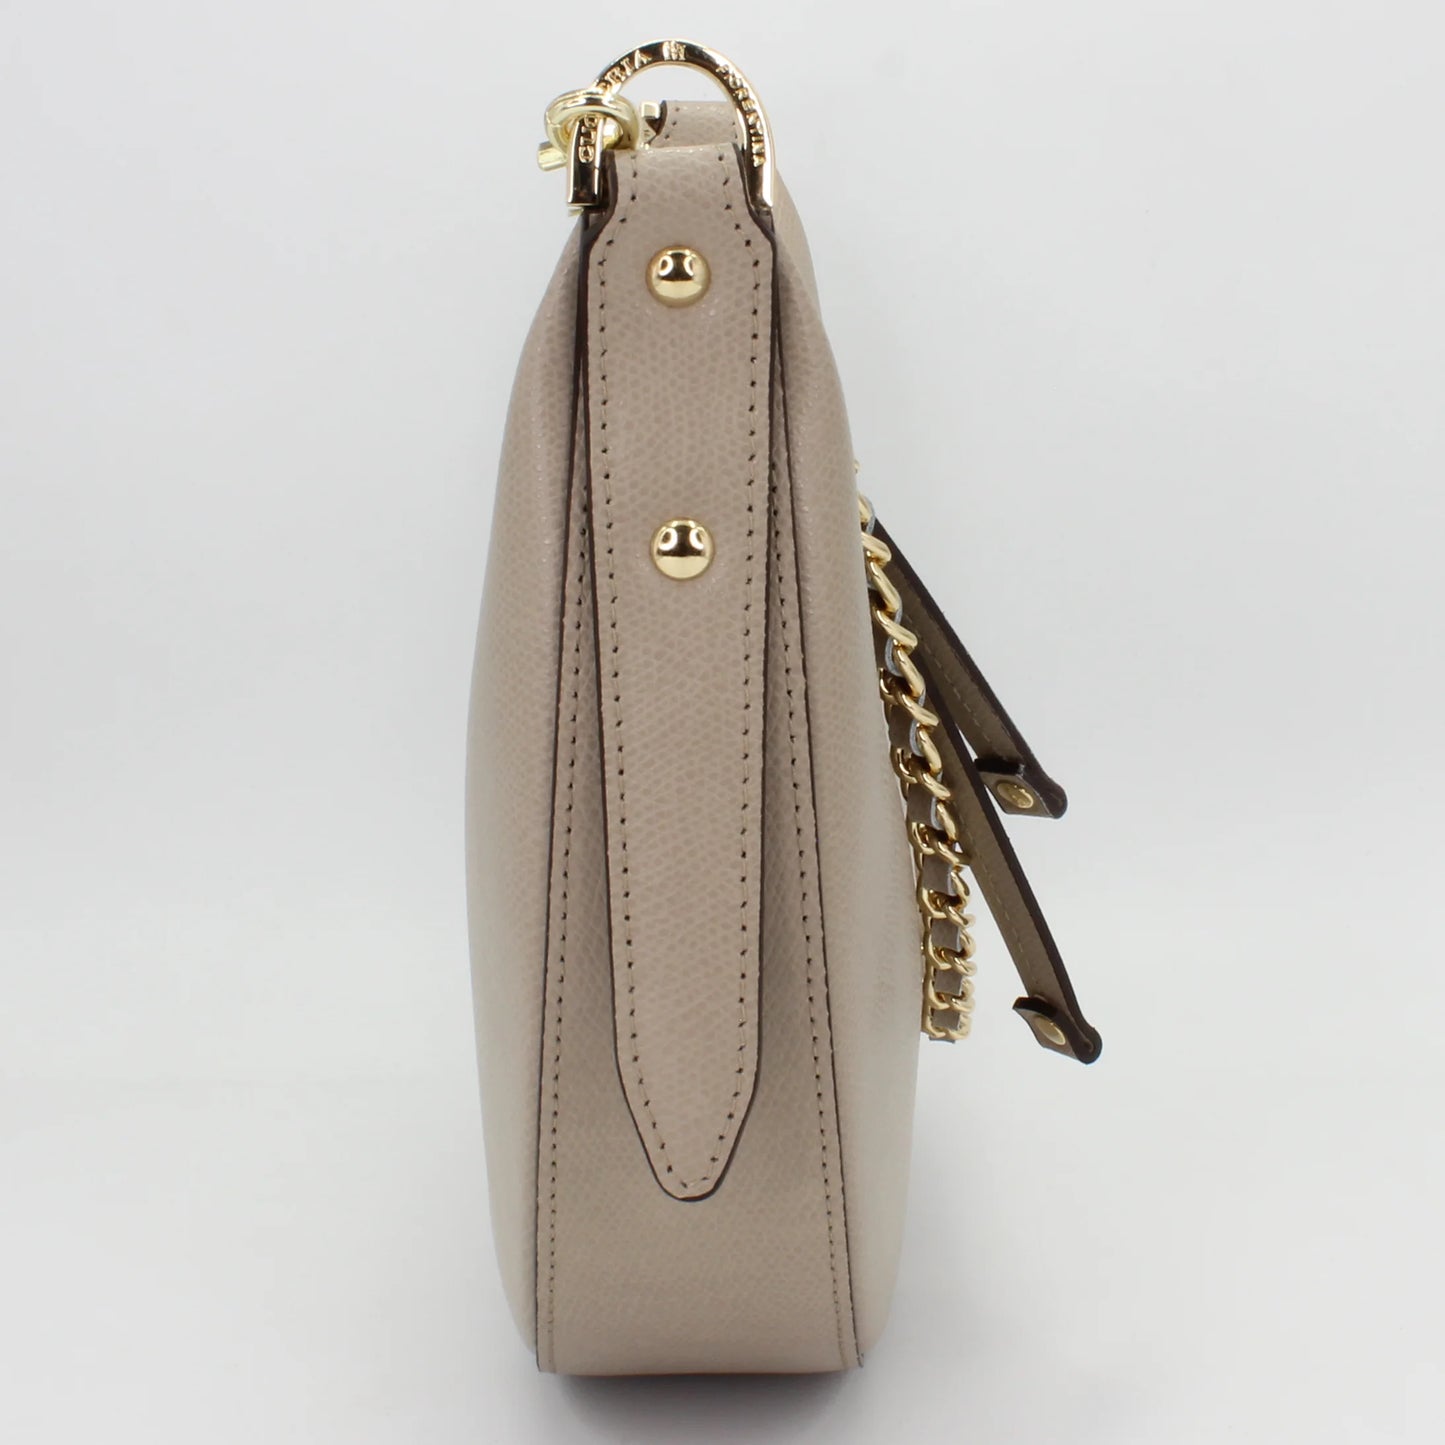 Shop Womens Italian-made Leather small handbag in taupe (B000005825420) or browse our range of hand-made Italian handbags for women in-store at Aliverti Cape Town, or shop online.   We deliver in South Africa & offer multiple payment plans as well as accept multiple safe & secure payment methods.